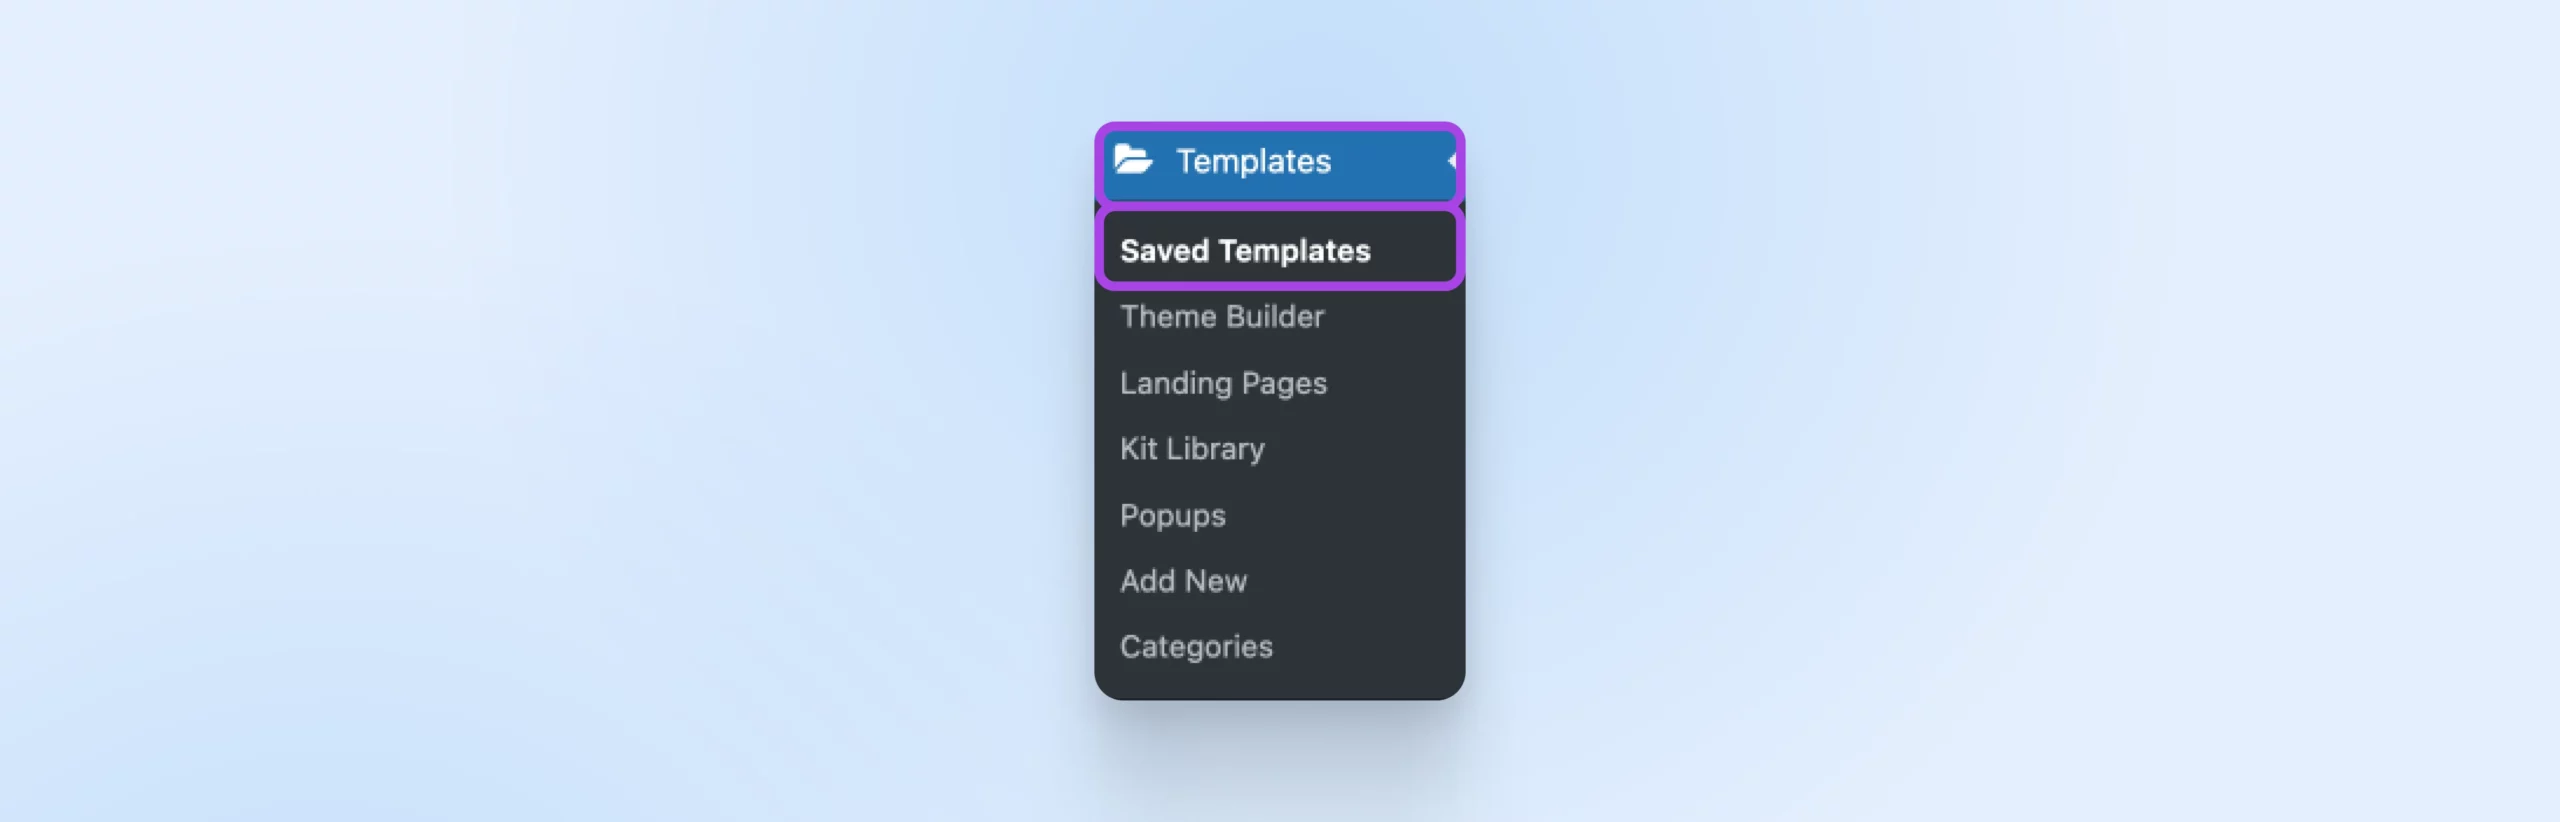 Templates selected, and the "Saved Templates" button clicked from the drop-down menu.